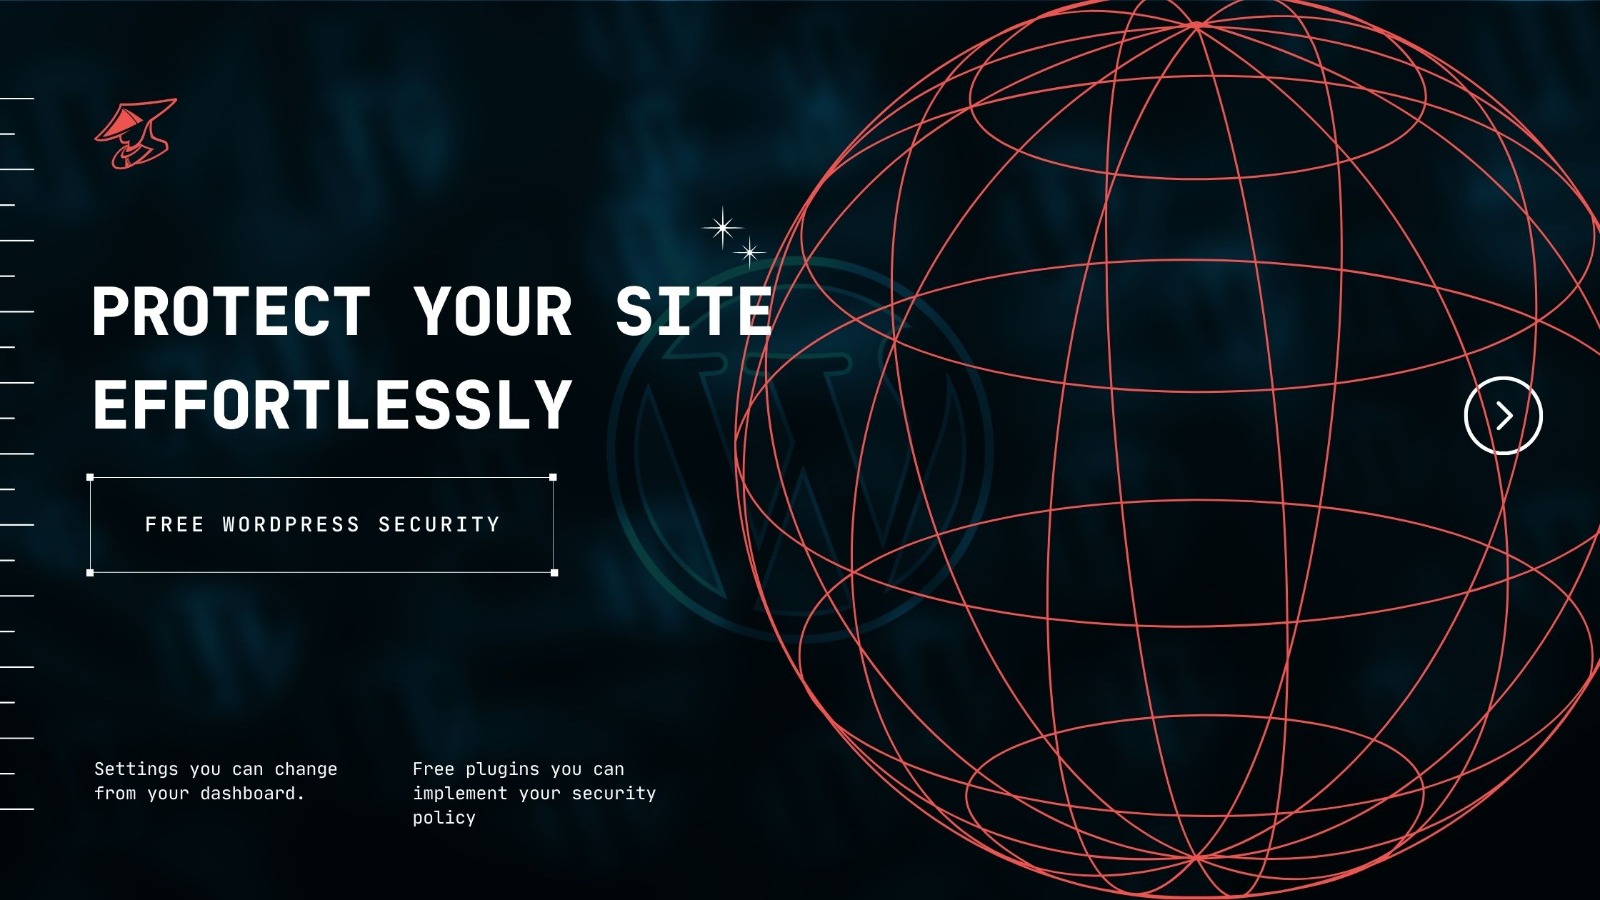 Ronin Pentest | Free WordPress Security Mastery: Protect Your Site Effortlessly